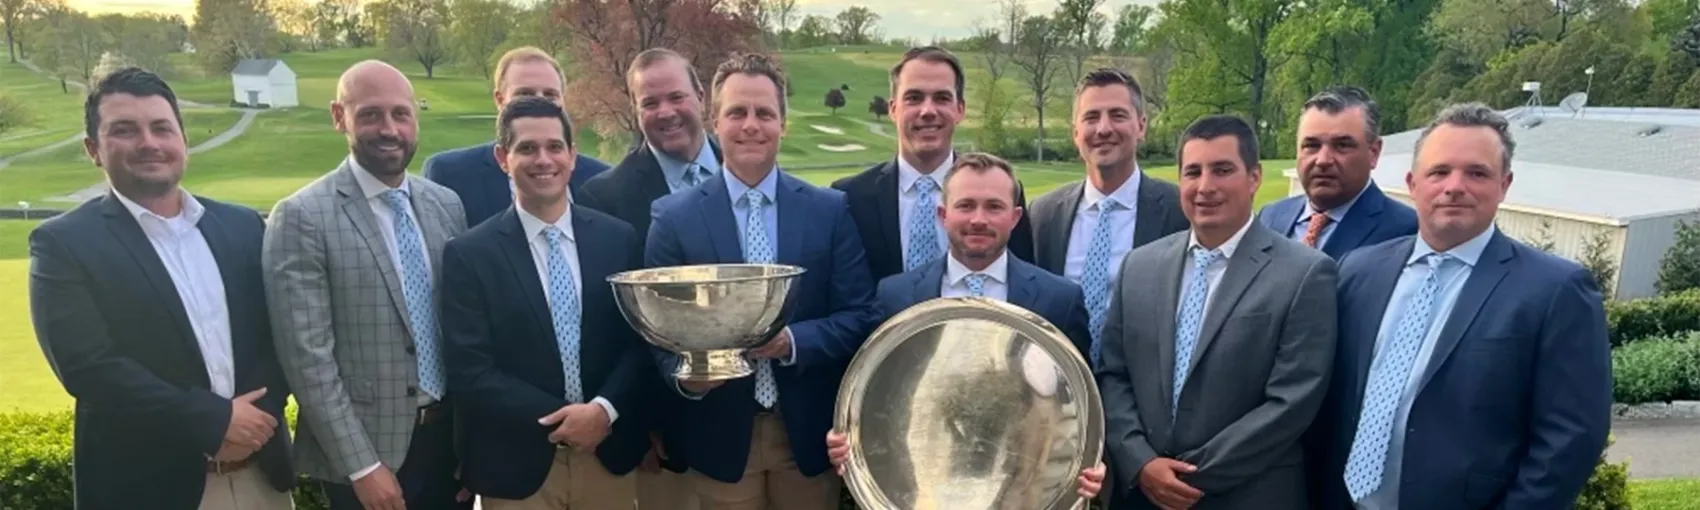 NJSGA Cruises to Compher Cup Victory over GAP